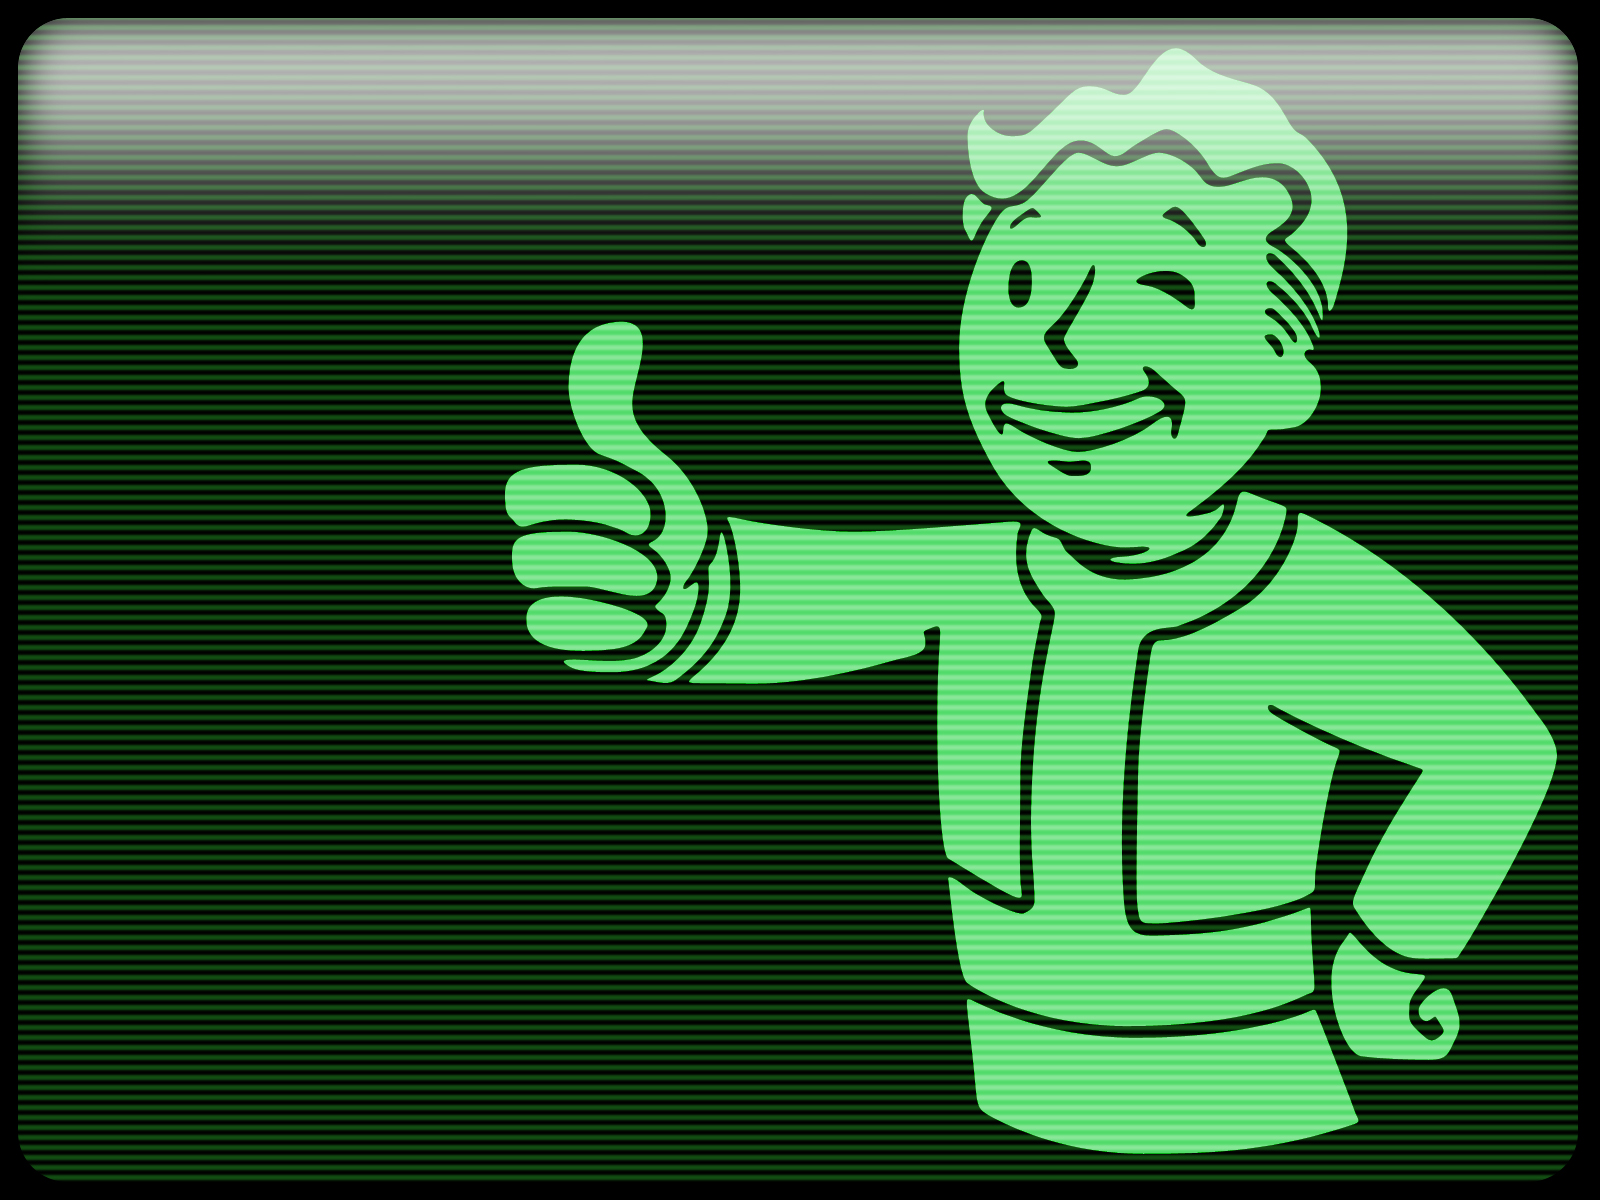 Fallout 4 Possibly Hinted: Fallout Pip Boy Trademark Filed.